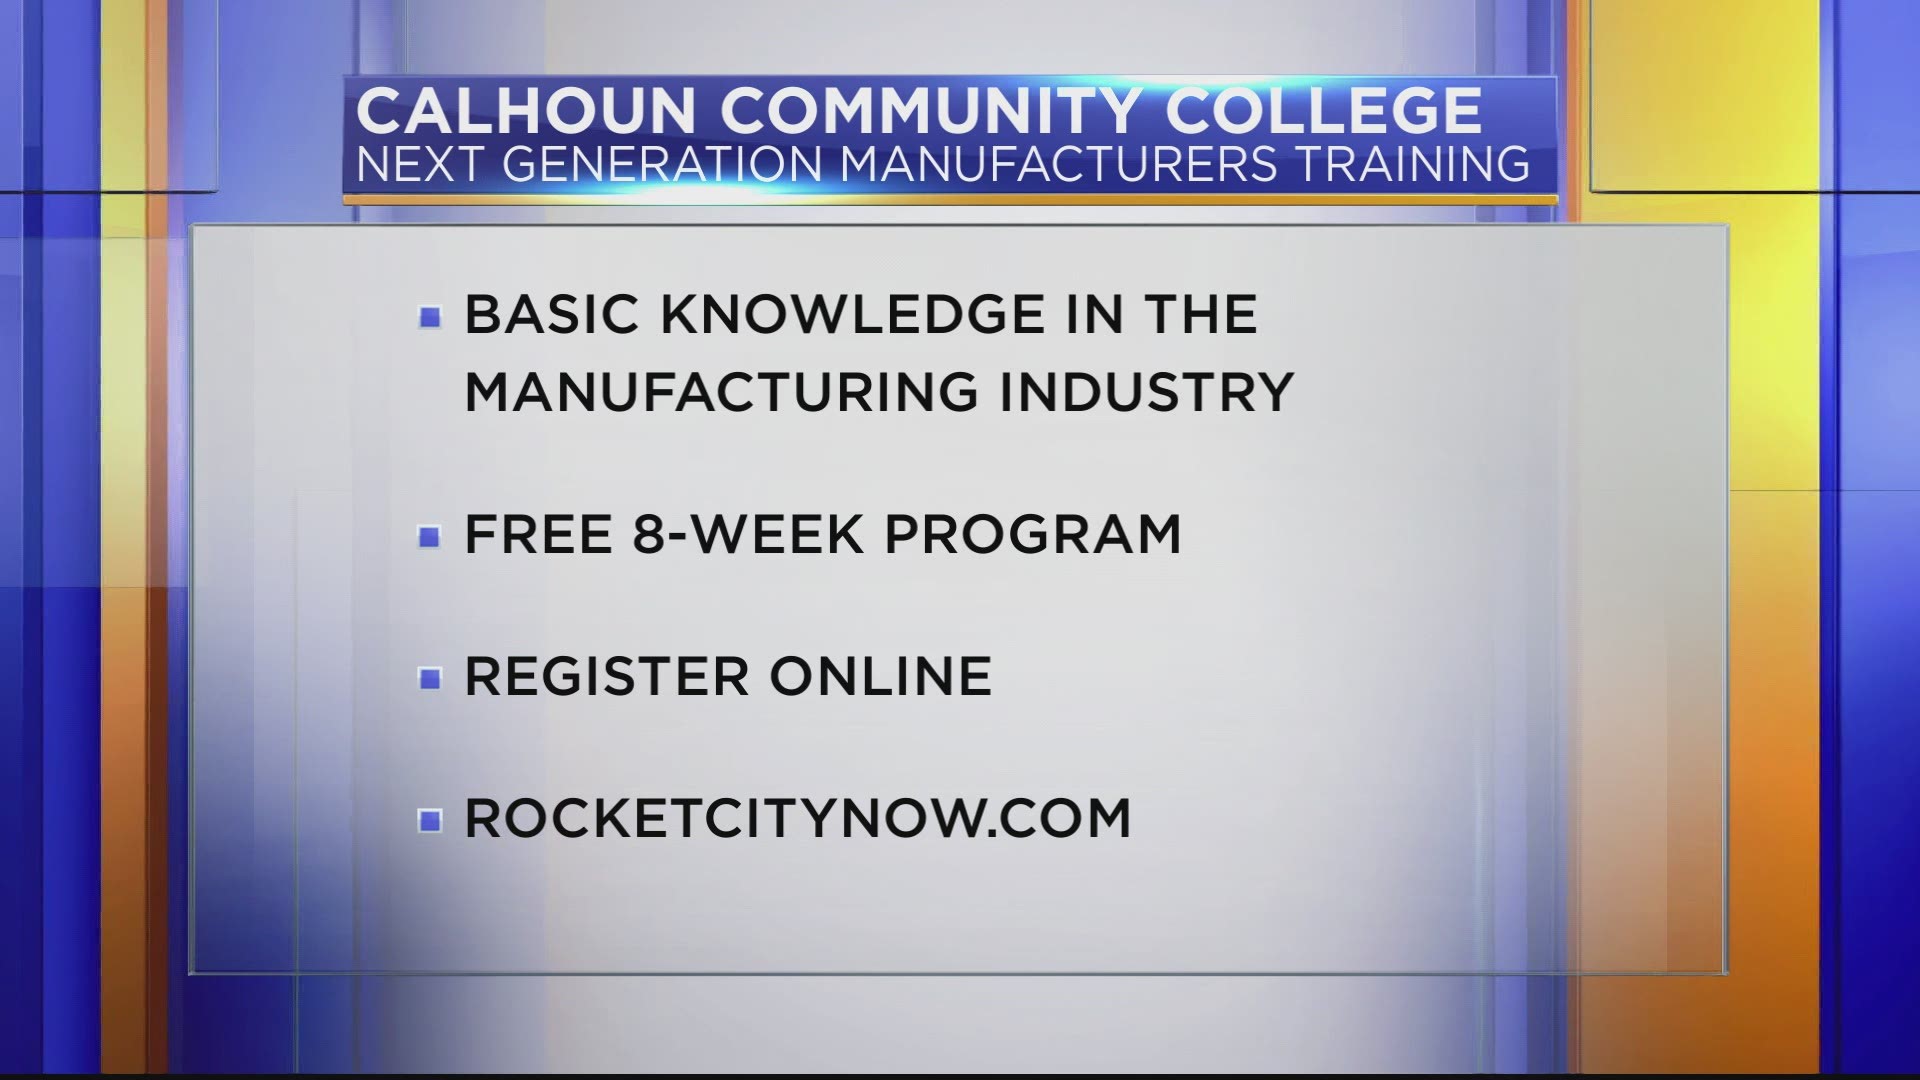 The program will provide students the basic knowledge and skills needed for advanced manufacturing jobs.